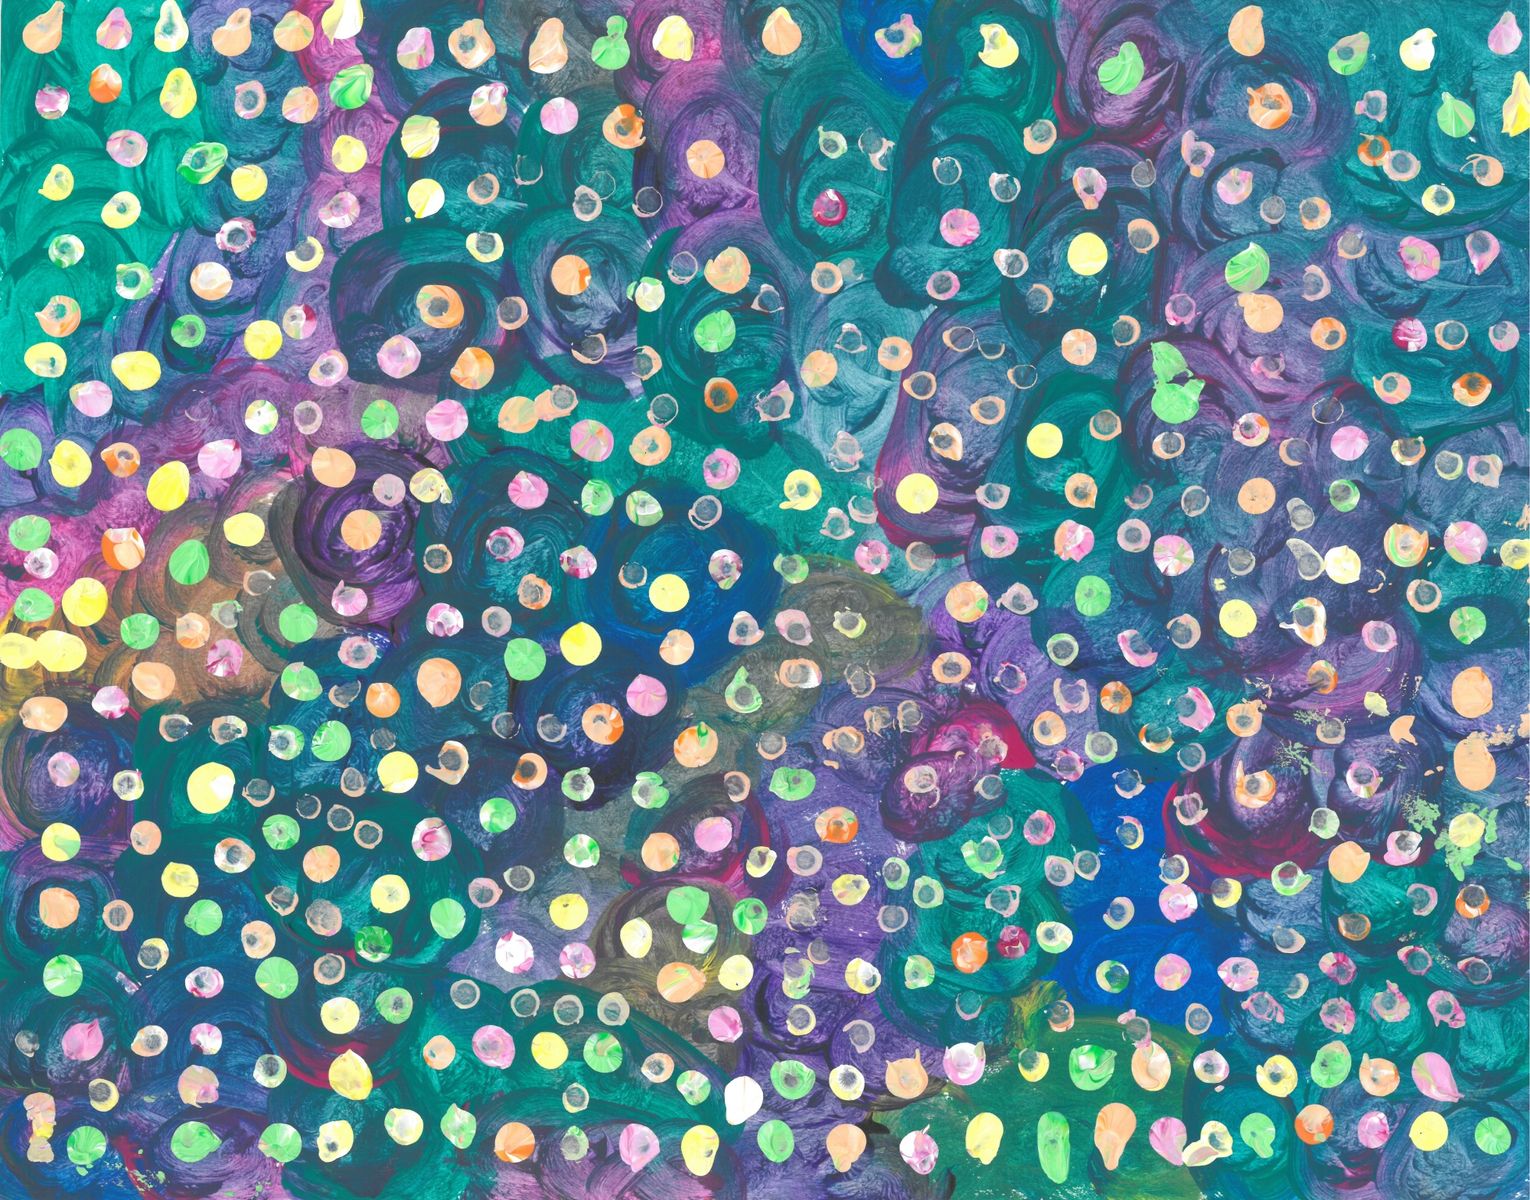 Acrylic on paper artwork of teal, blue and purple swirl background and yellow, green and orange dots overlaid